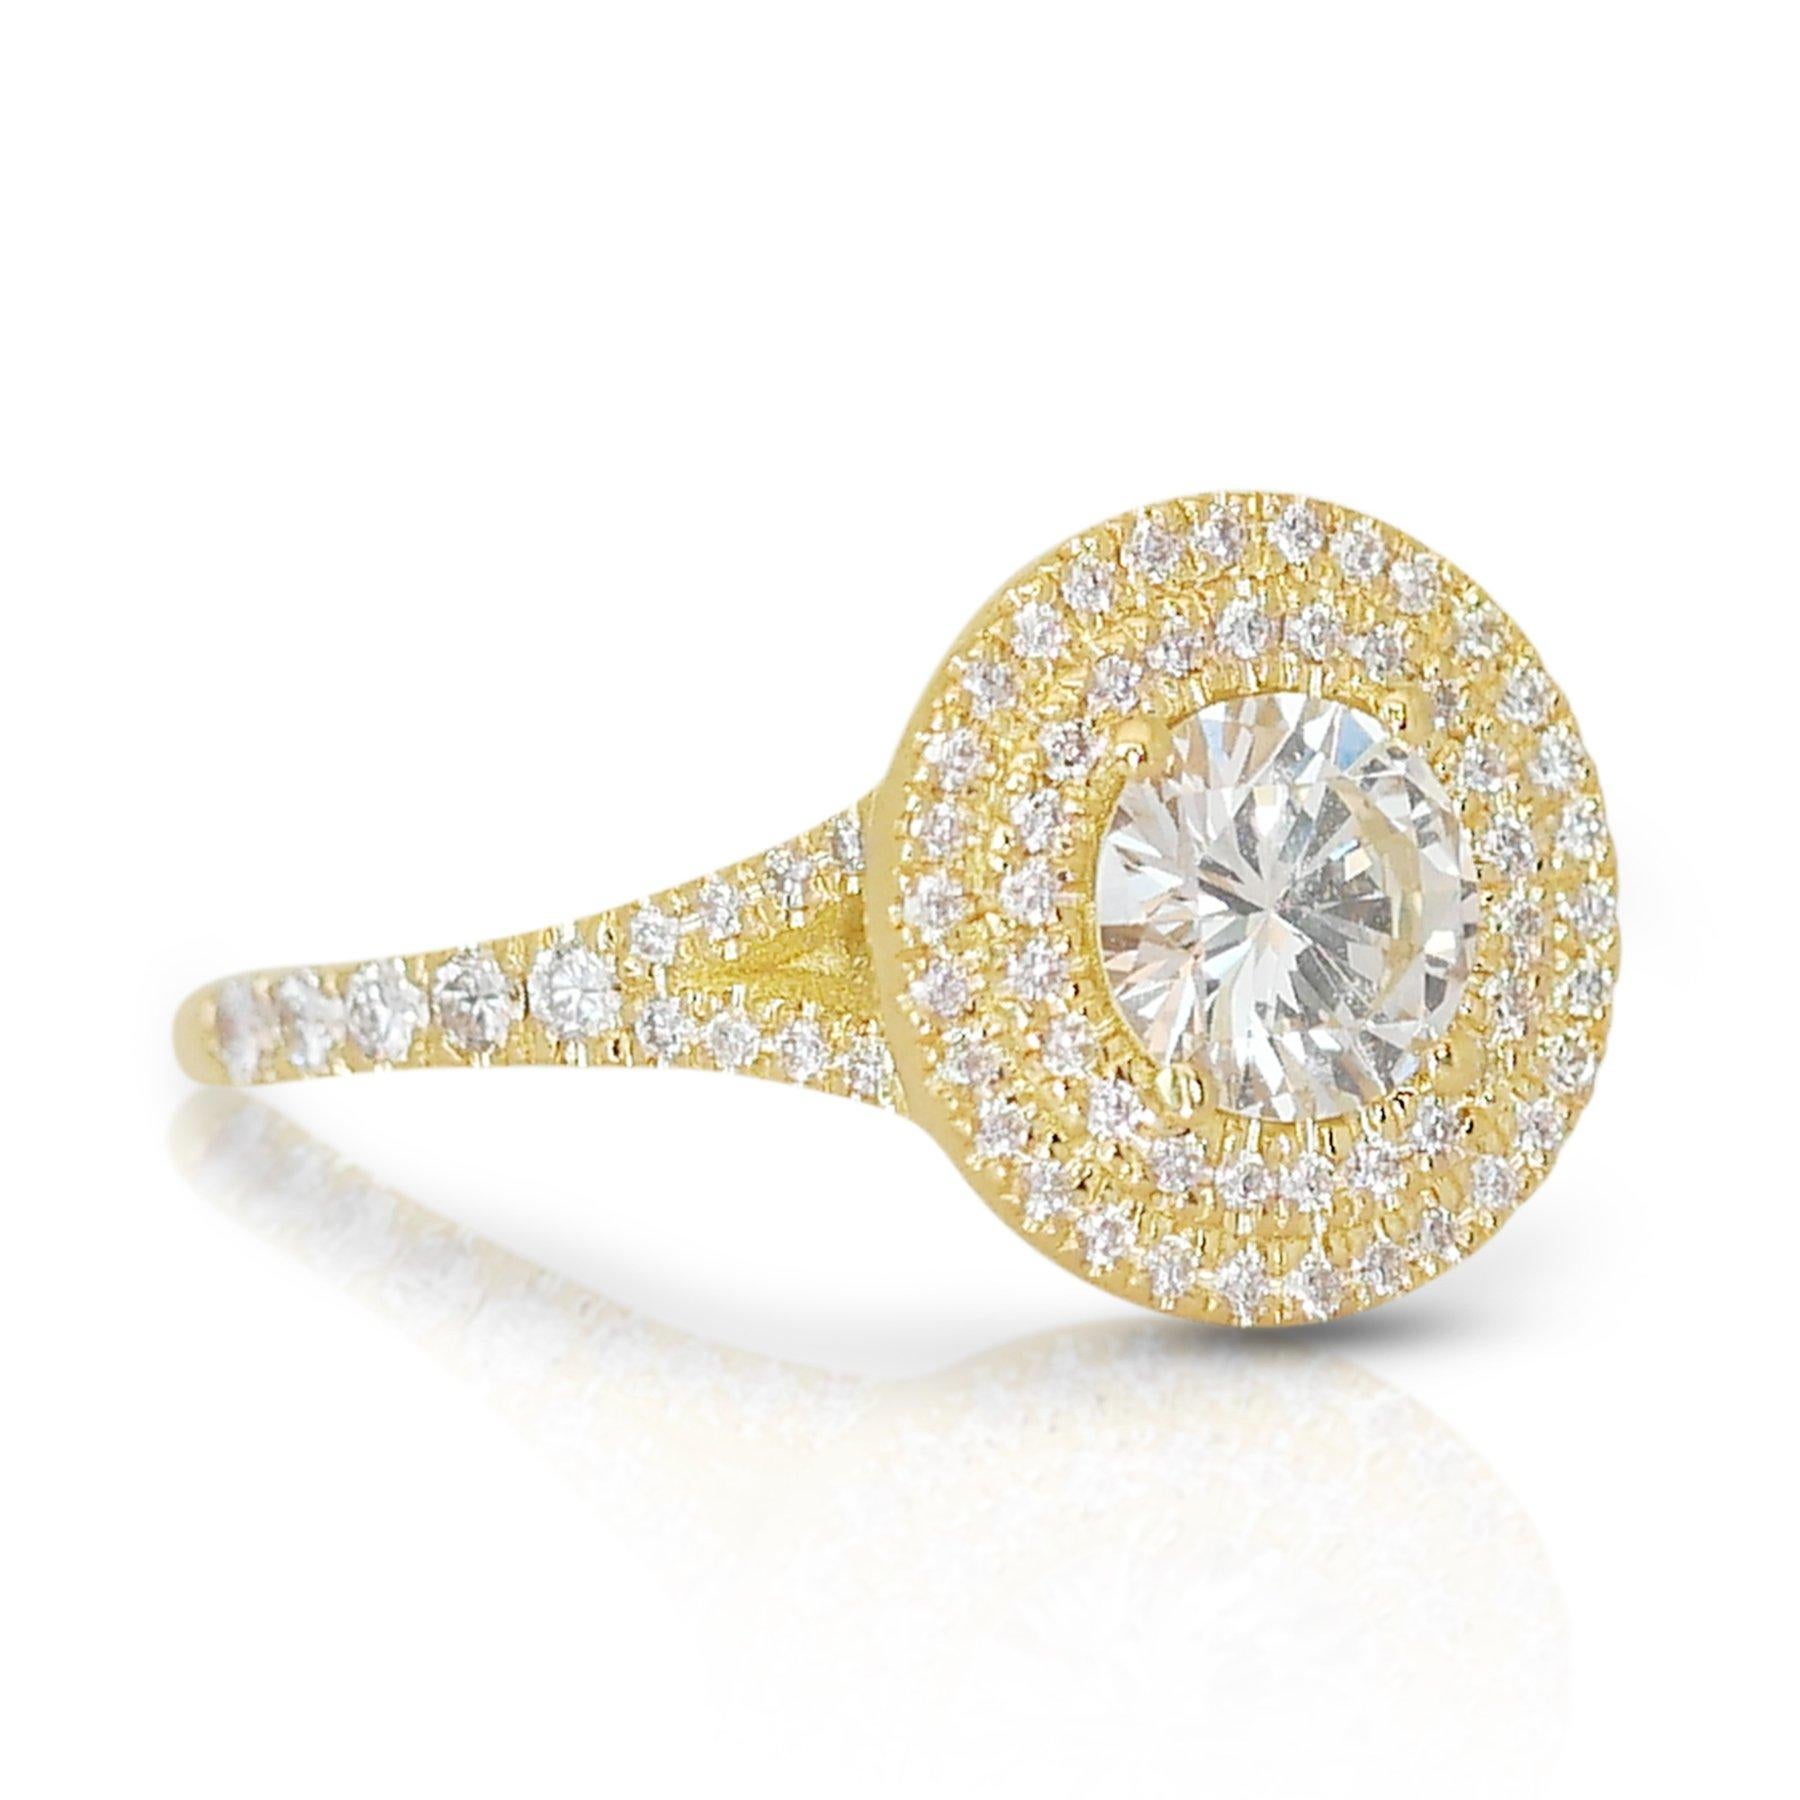 Exquisite 1.44ct Diamond Double Halo Ring in 18k Yellow Gold - GIA Certified

This stunning diamond double halo ring, meticulously crafted from 18k yellow gold, features a mesmerizing 1.03-carat round brilliant main diamond. Surrounding the central